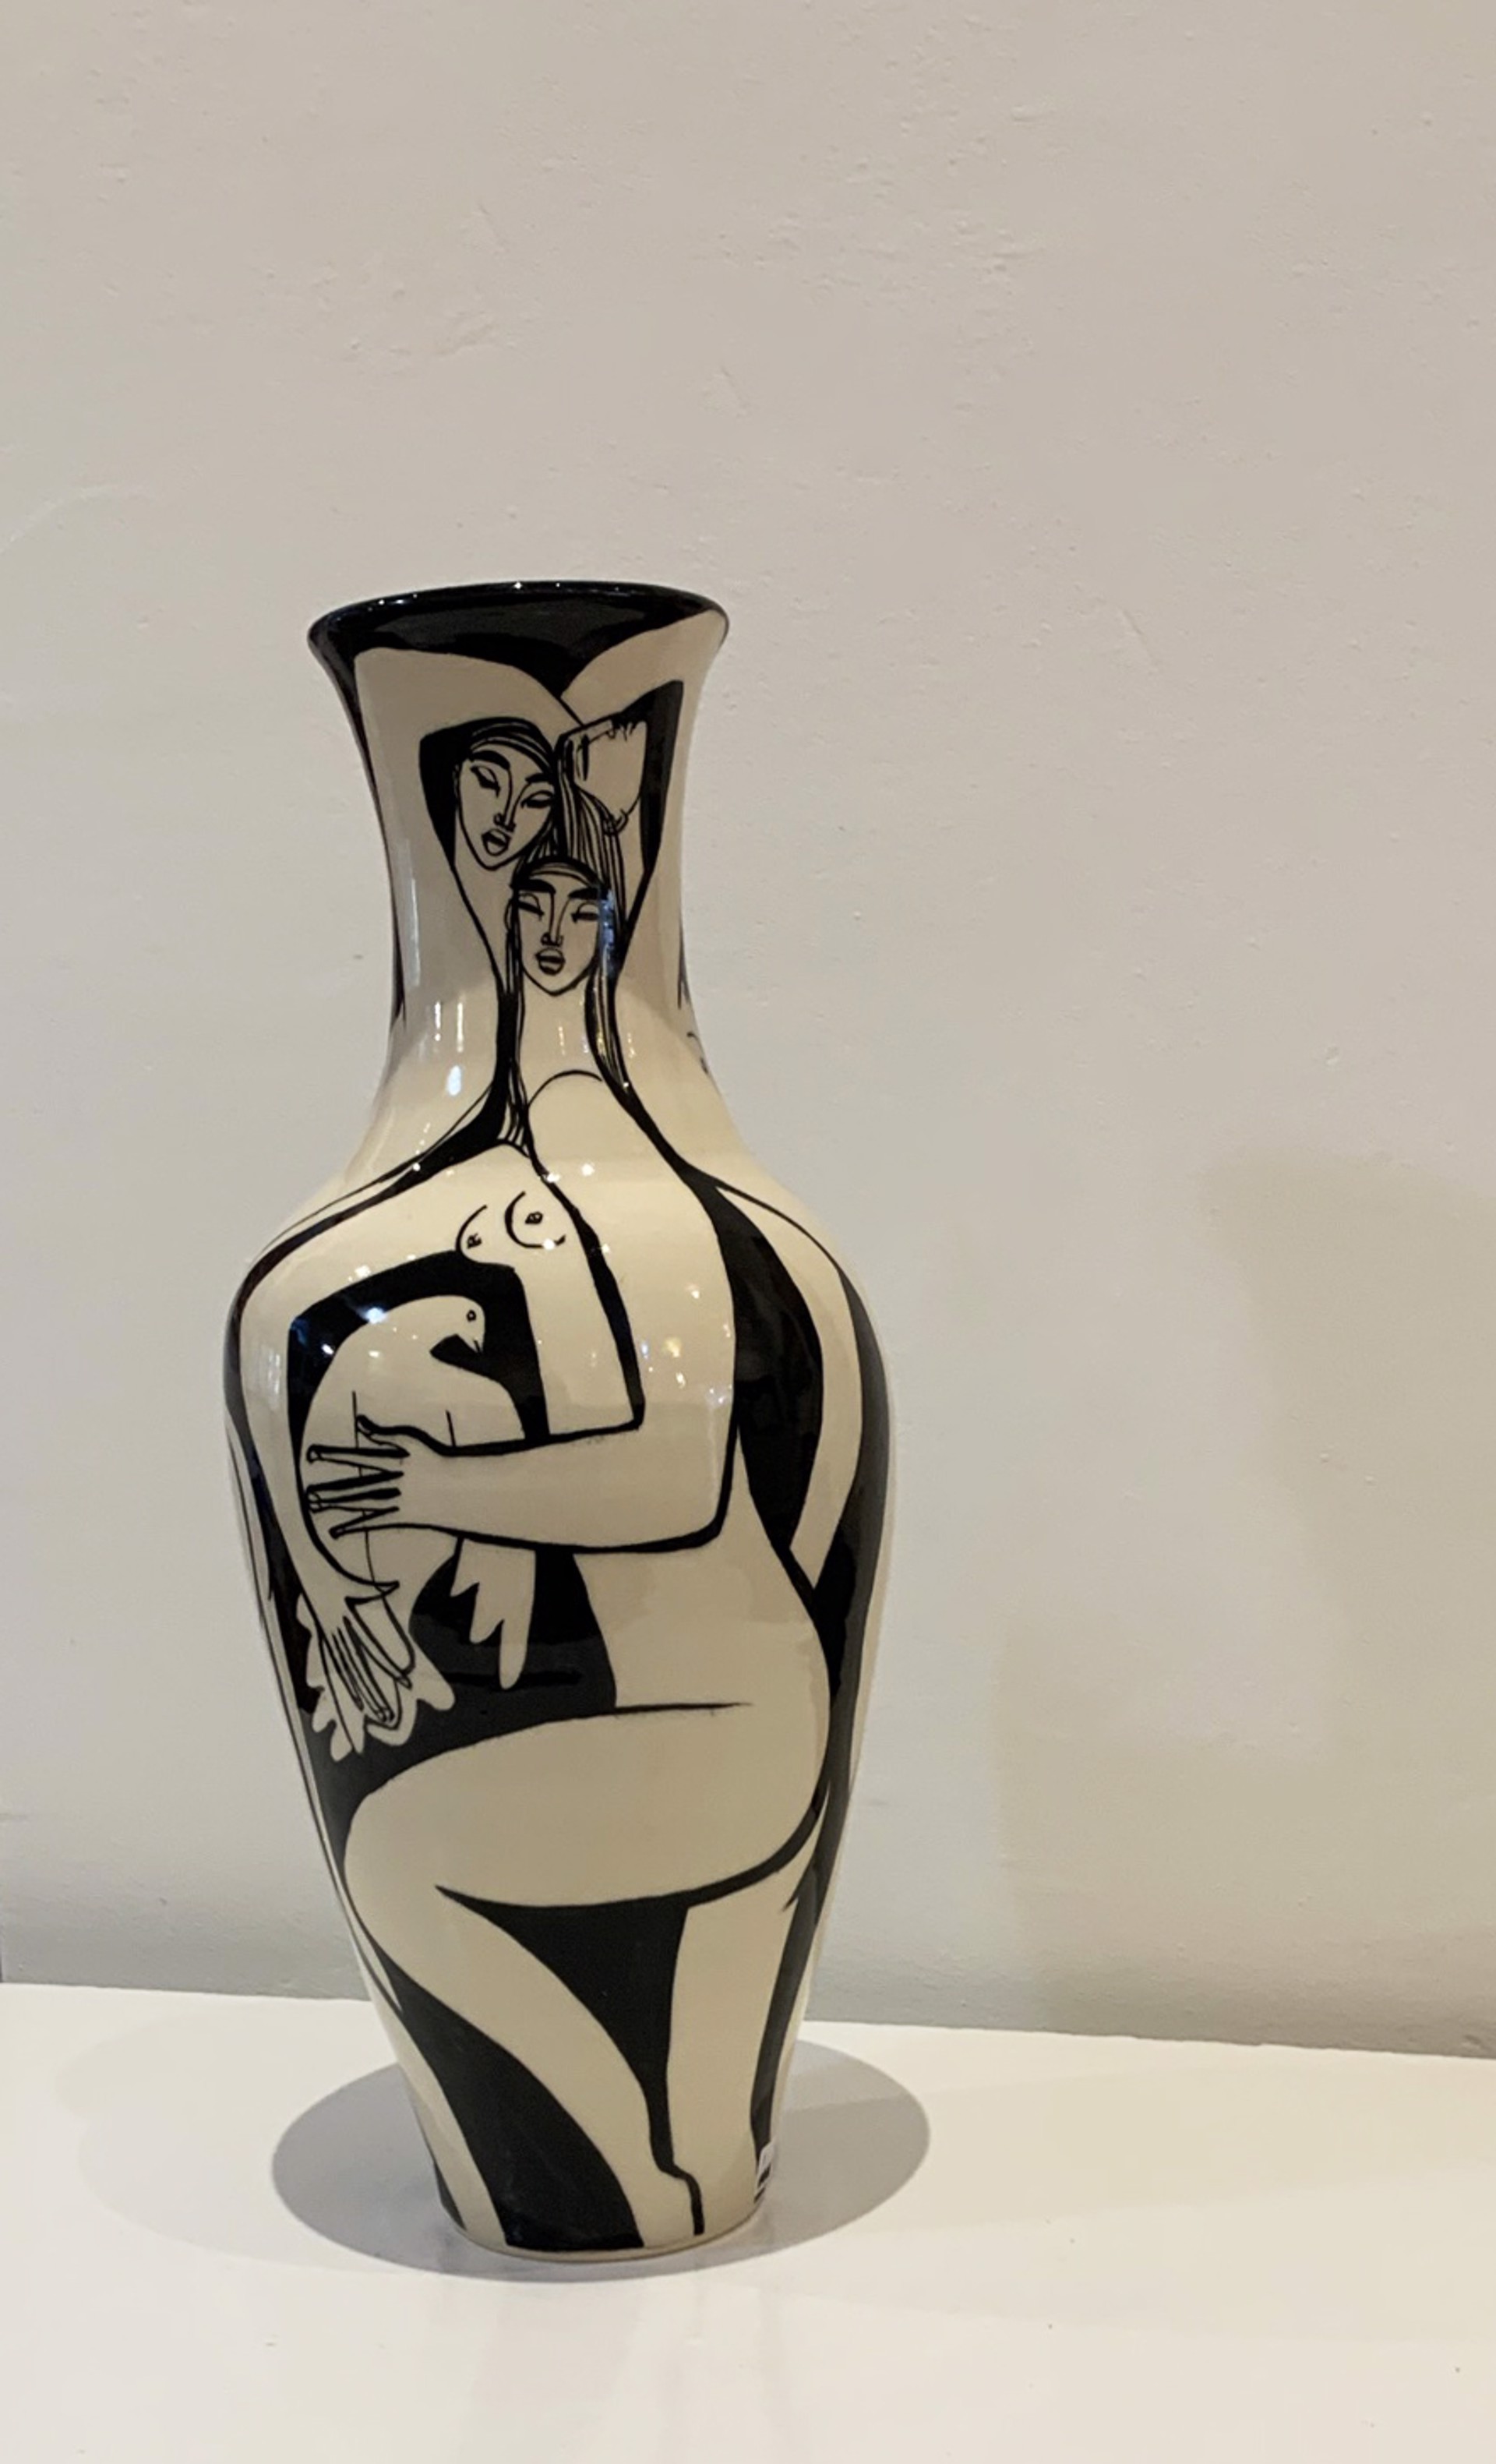 Hold On To Peace Vase #1 by Ken and Tina Riesterer